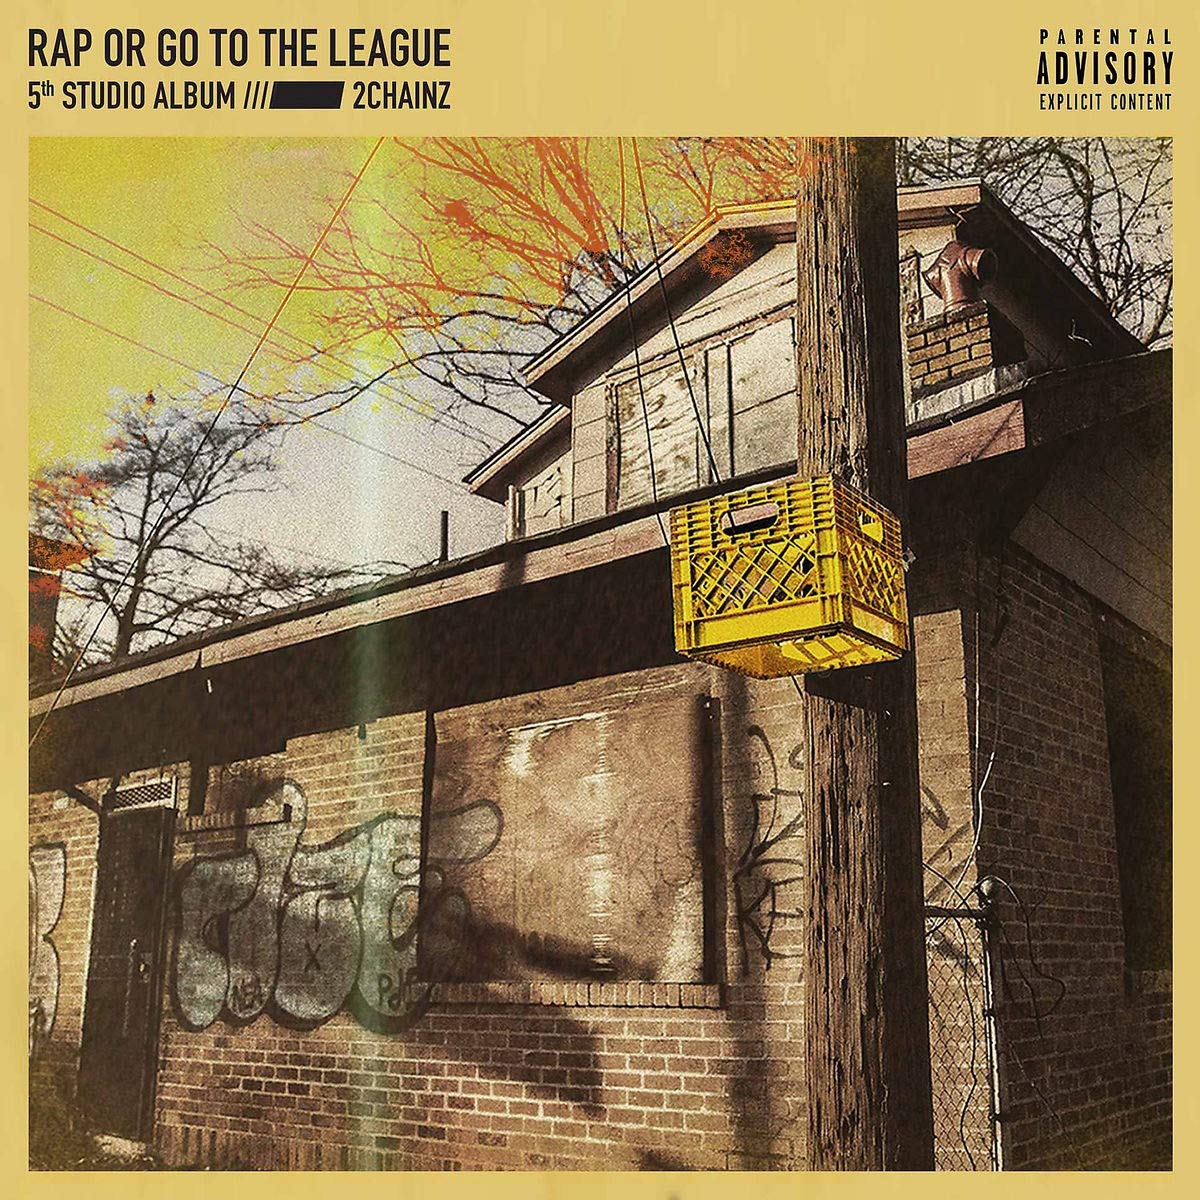 CD Shop - TWO CHAINZ RAP OR GO TO THE LEAGUE